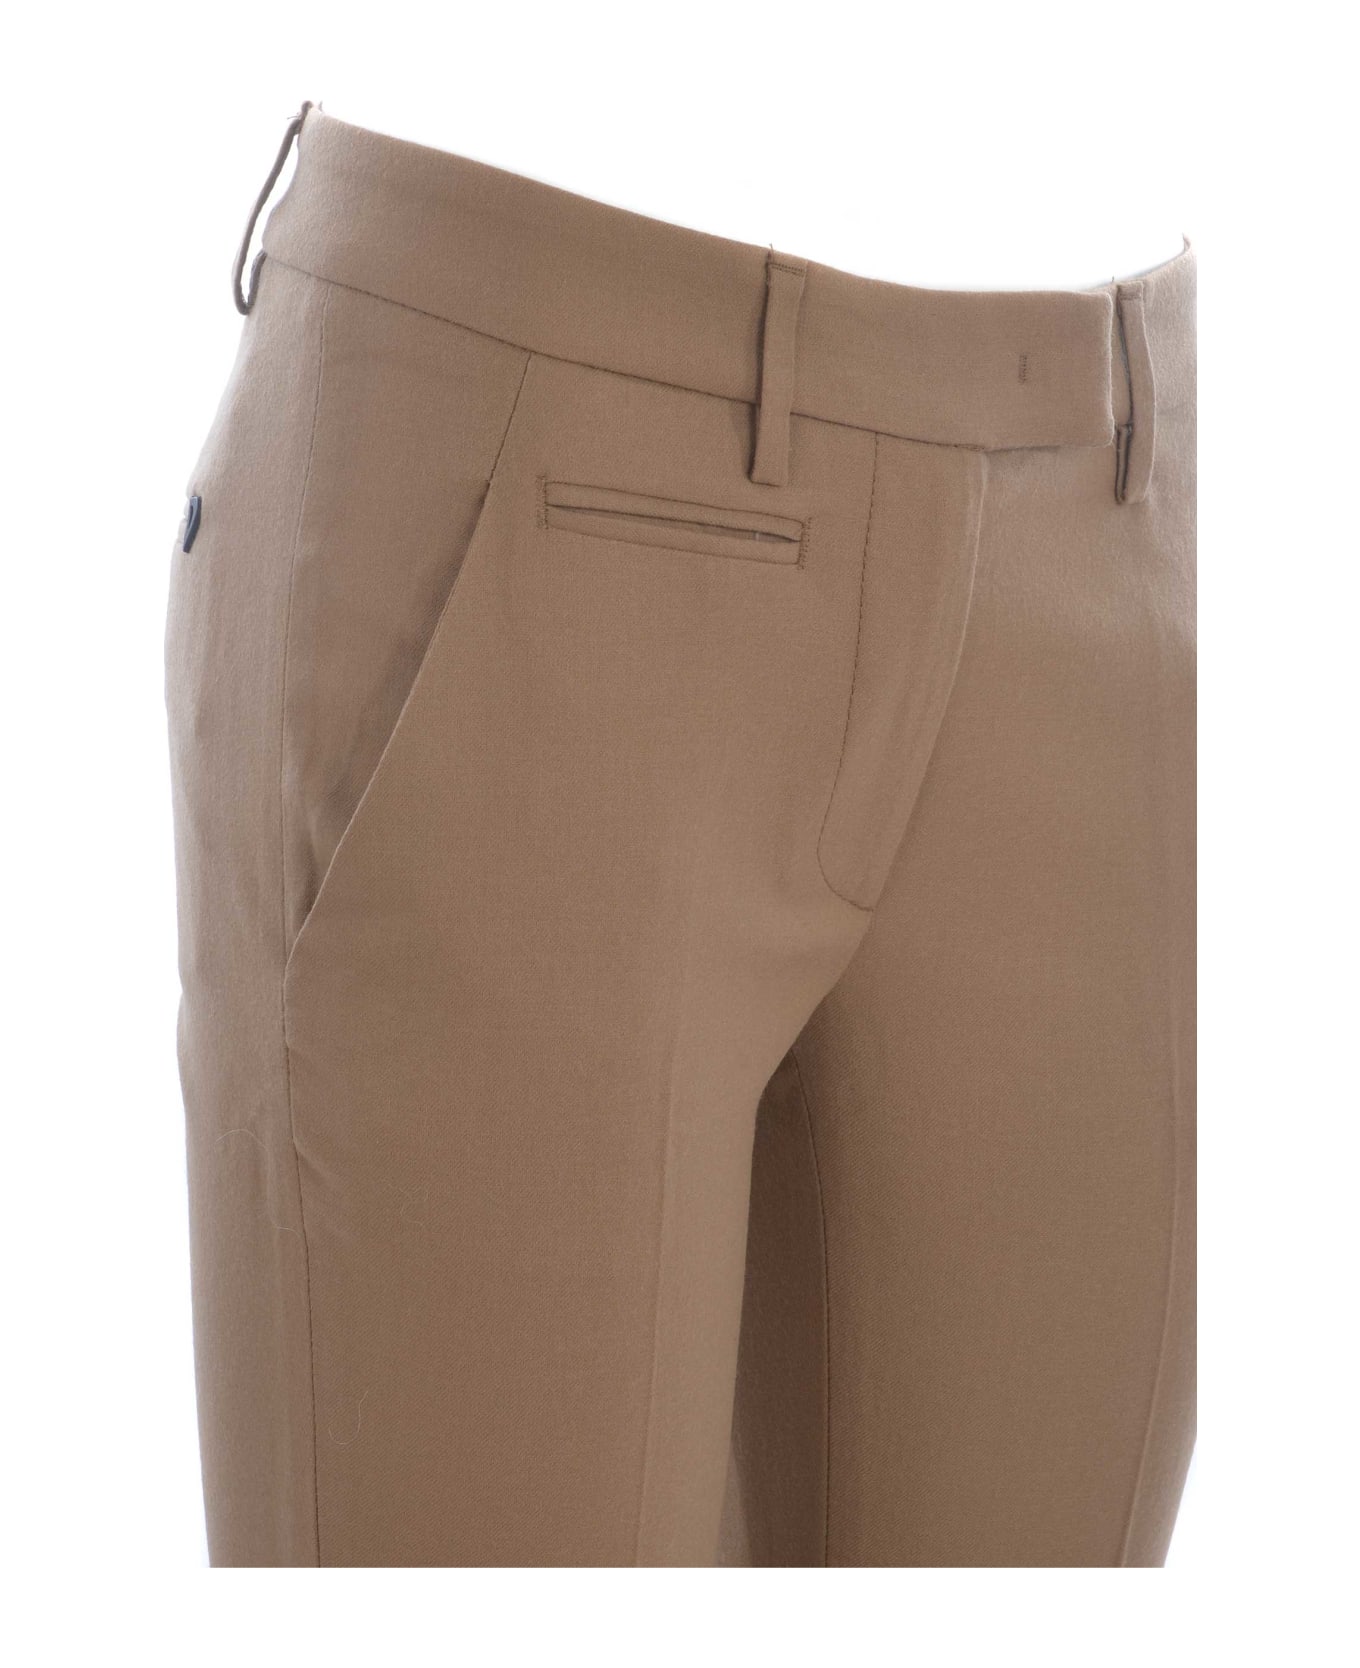 Dondup Trousers Dondup "perfect" In Virgin Wool - Cammello